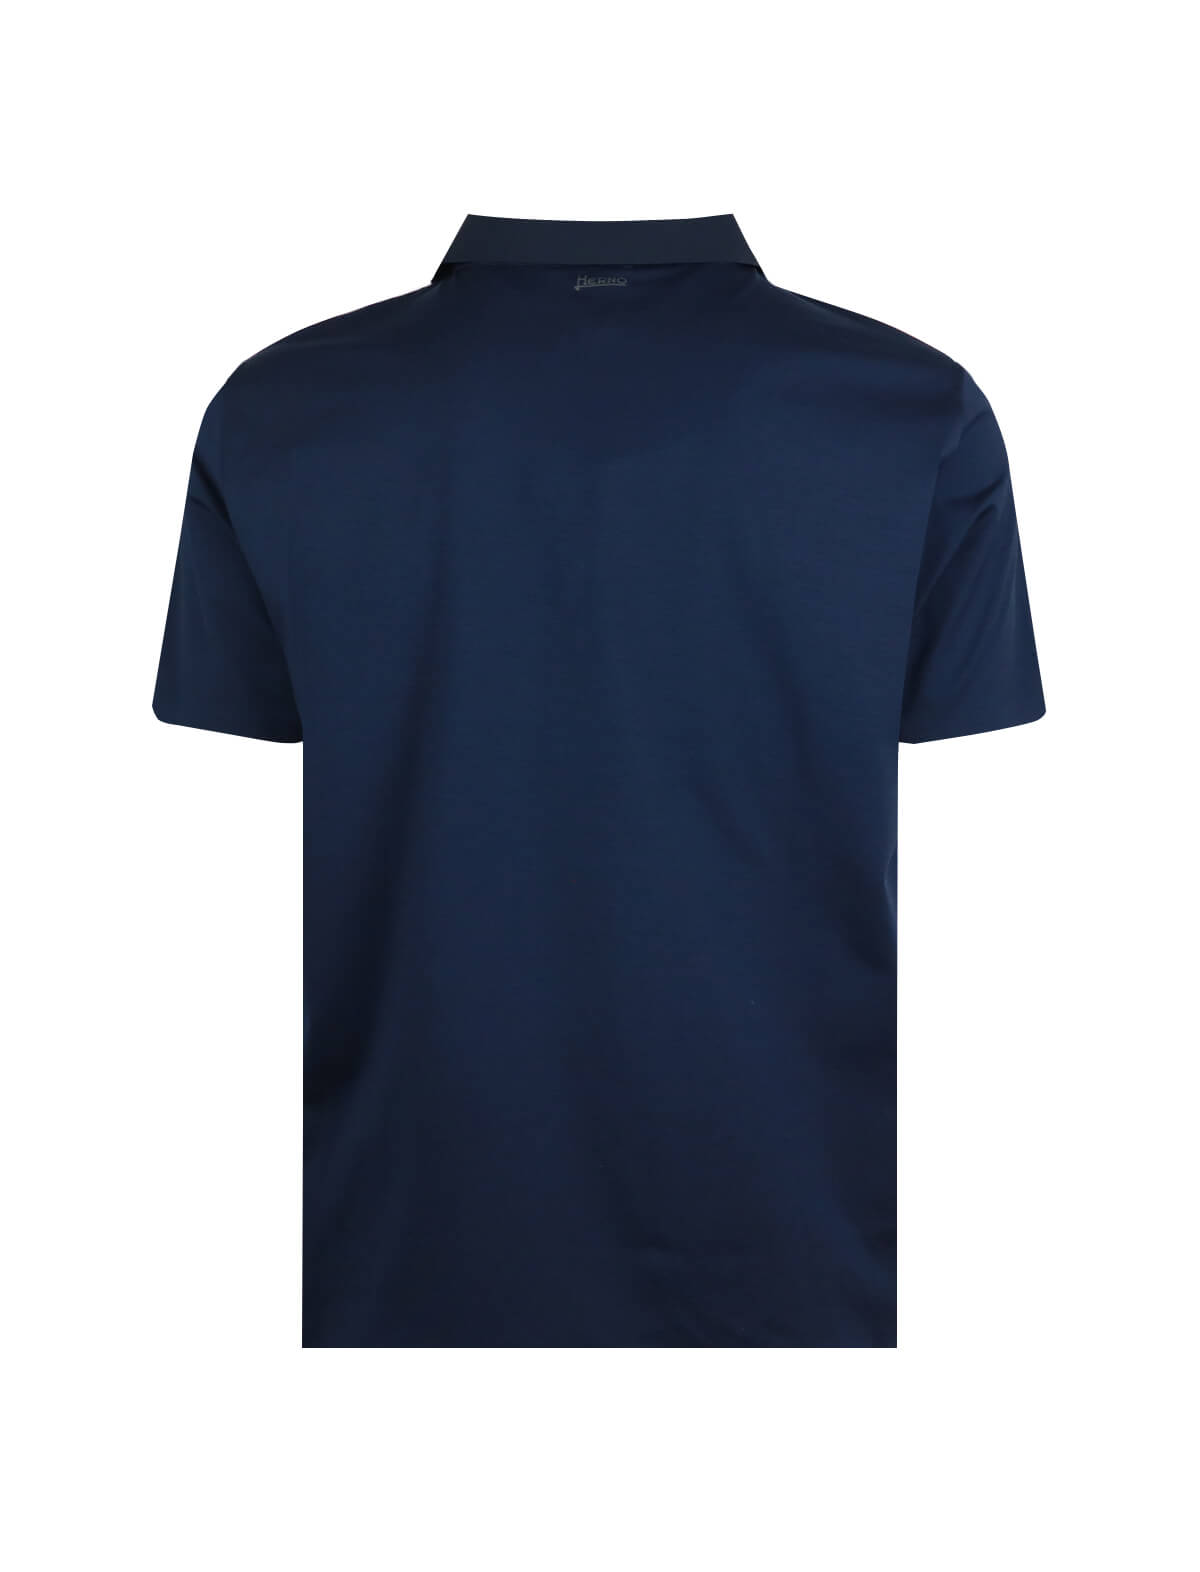 HERNO Superfine Cotton Stretch Polo Shirt In Blue Navy